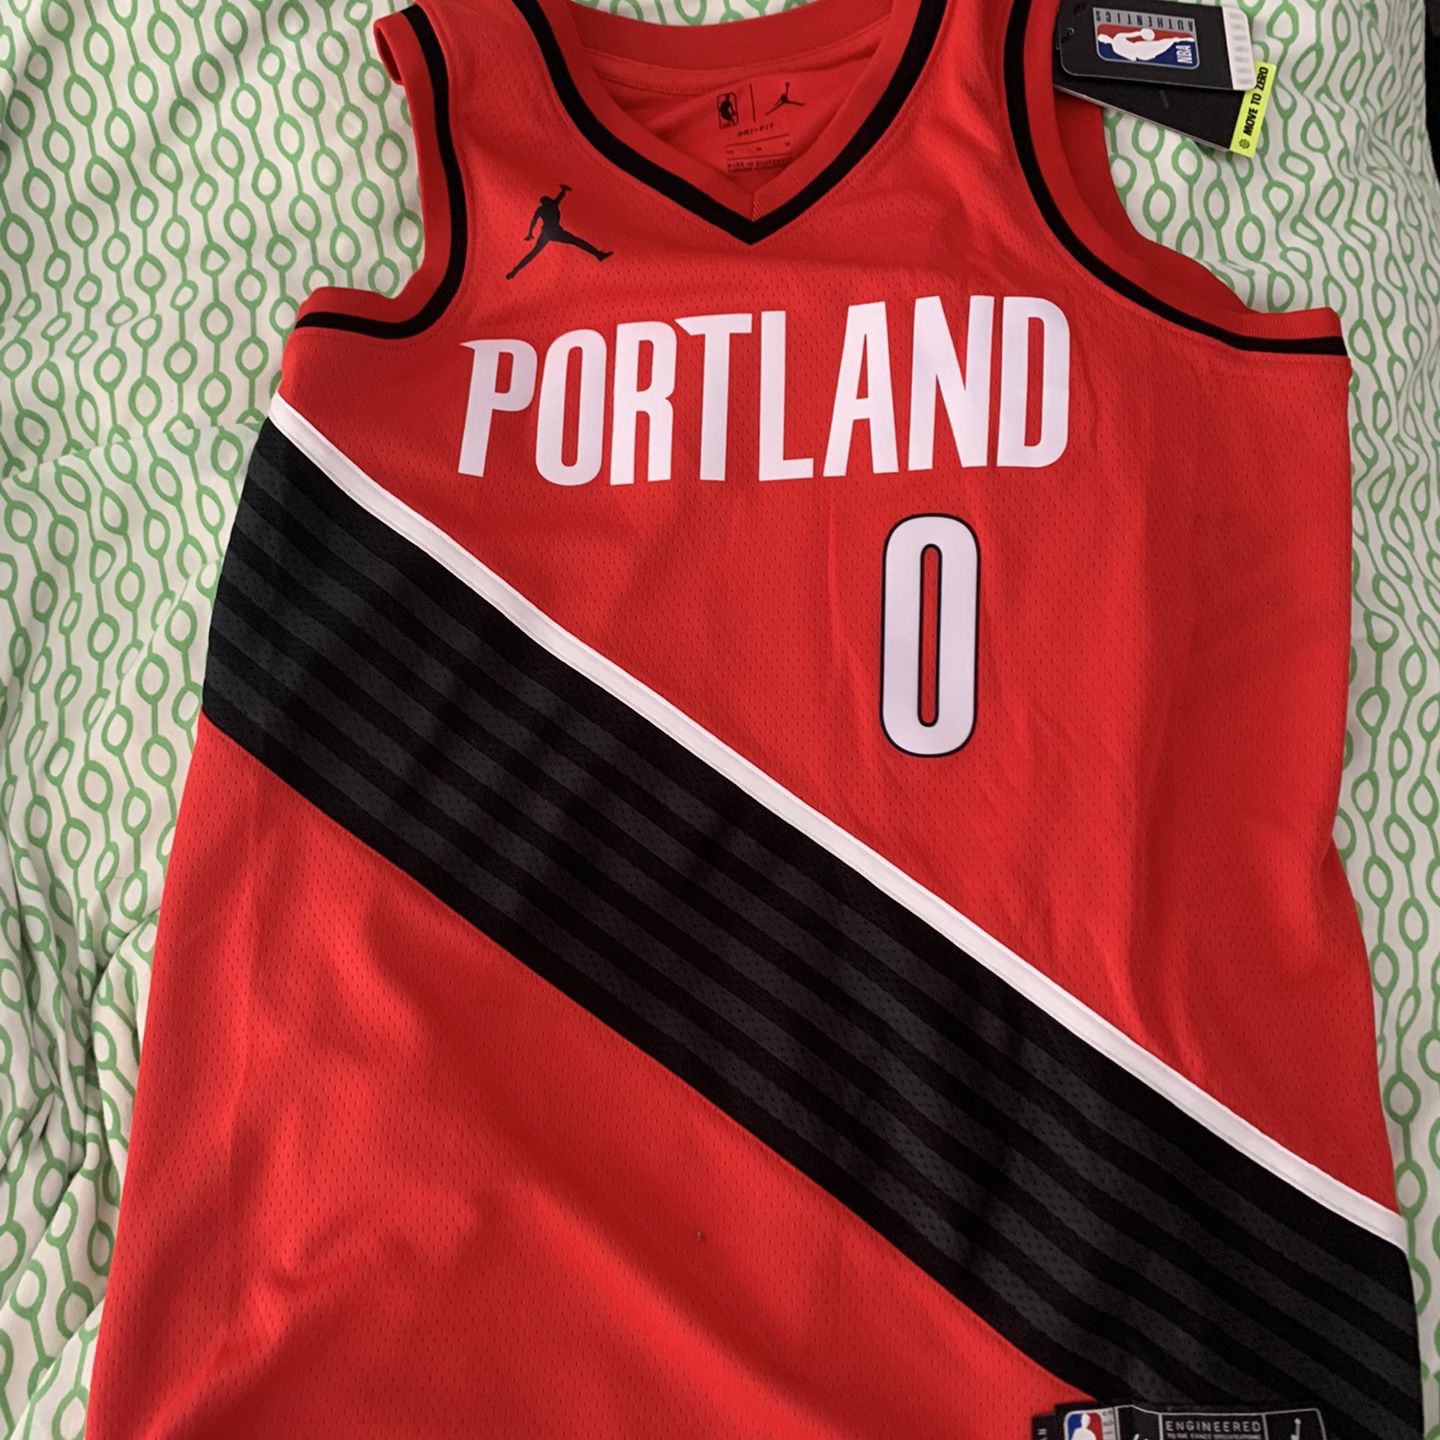 Rip city Damian Lillard jersey for Sale in Indianapolis, IN - OfferUp